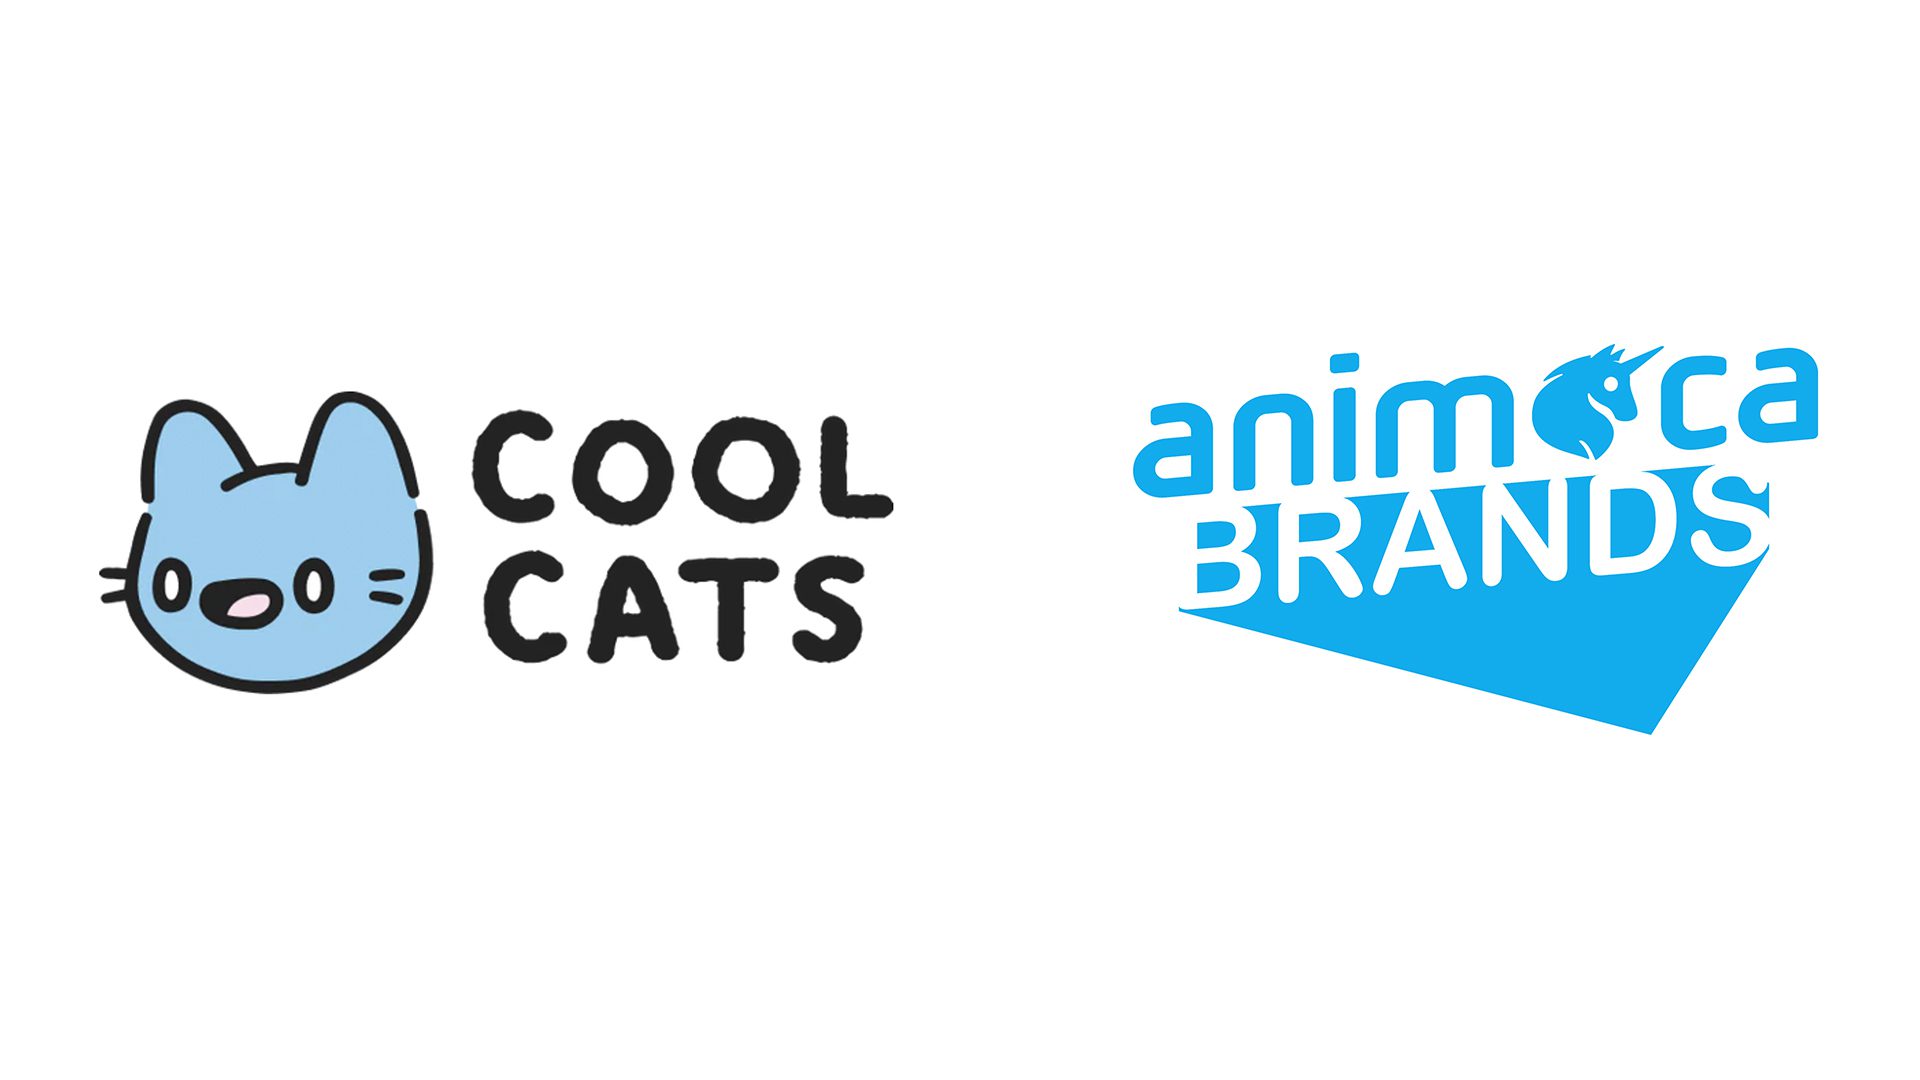 Cool Cats Group secures strategic investment from Animoca Brands, building on gaming partnership